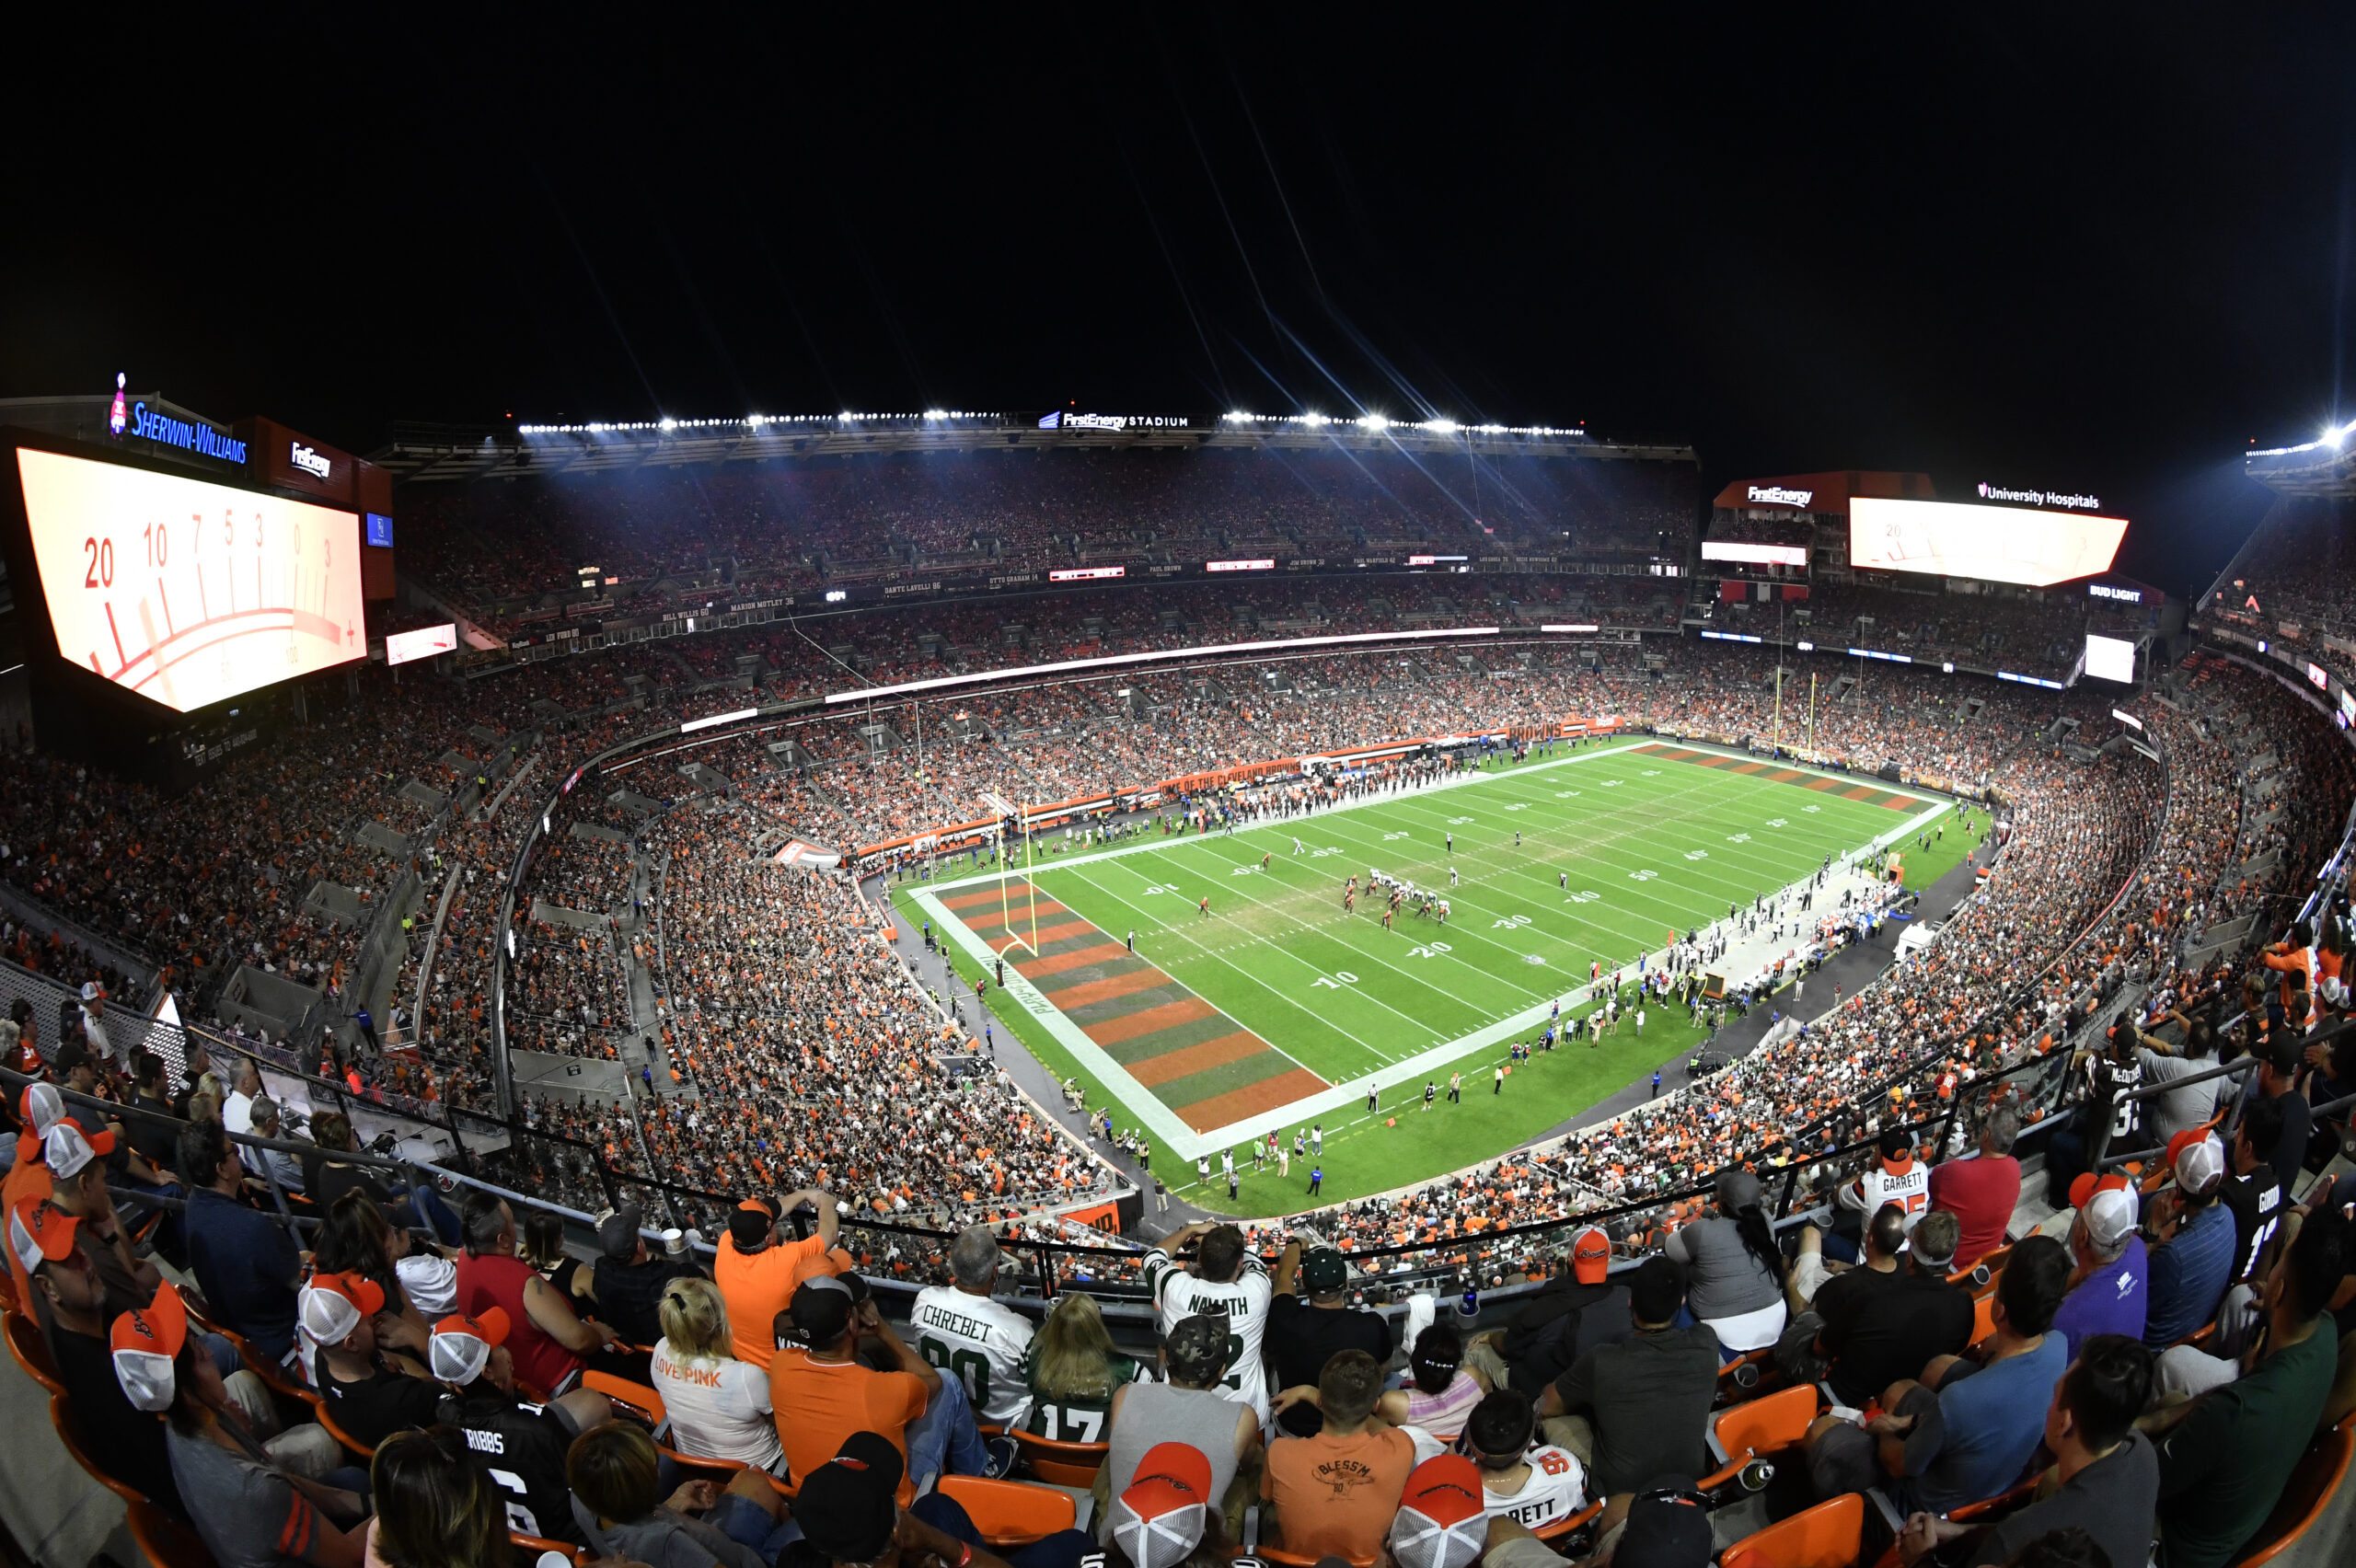 Report: Browns want new stadium with roof, FirstEnergy Stadium ‘quickly and poorly built’